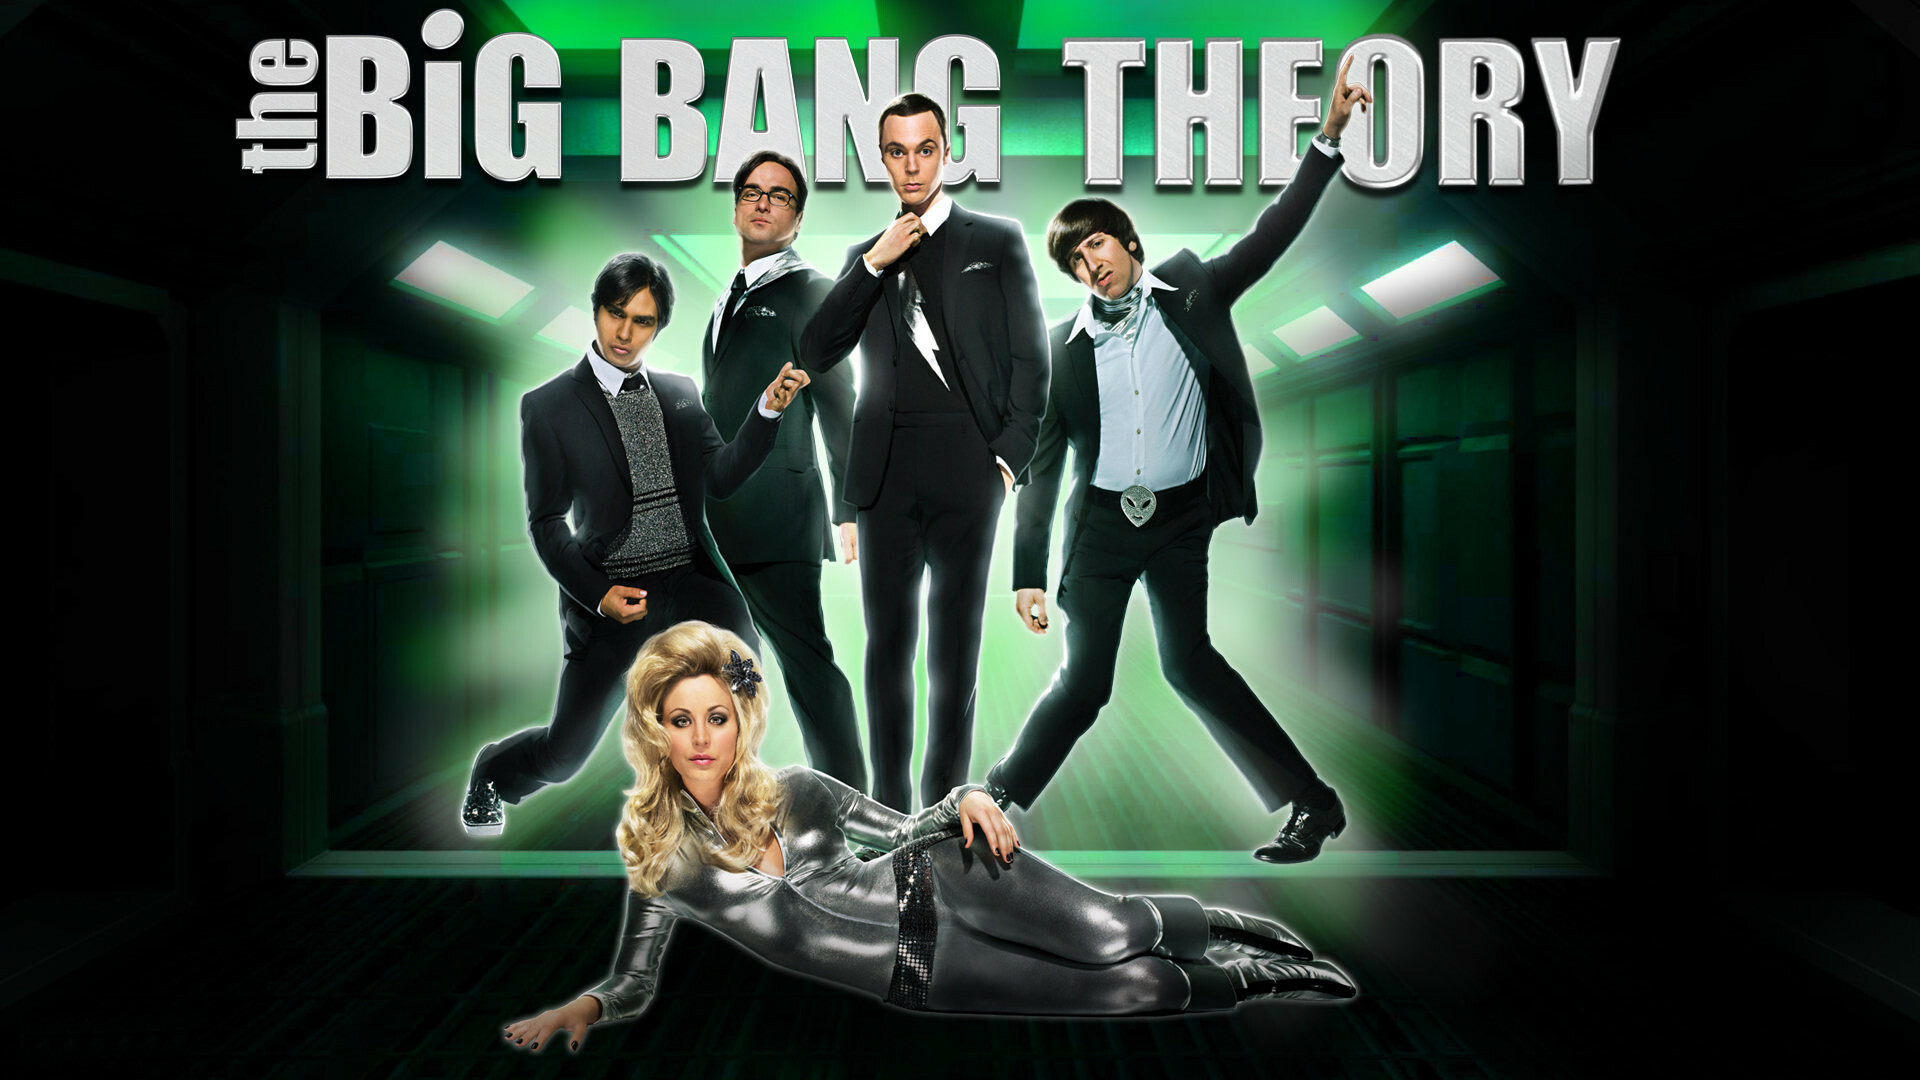 The Big Bang Theory: A CBS sitcom co-created by Chuck Lorre and featuring four genius-level friends. 1920x1080 Full HD Wallpaper.